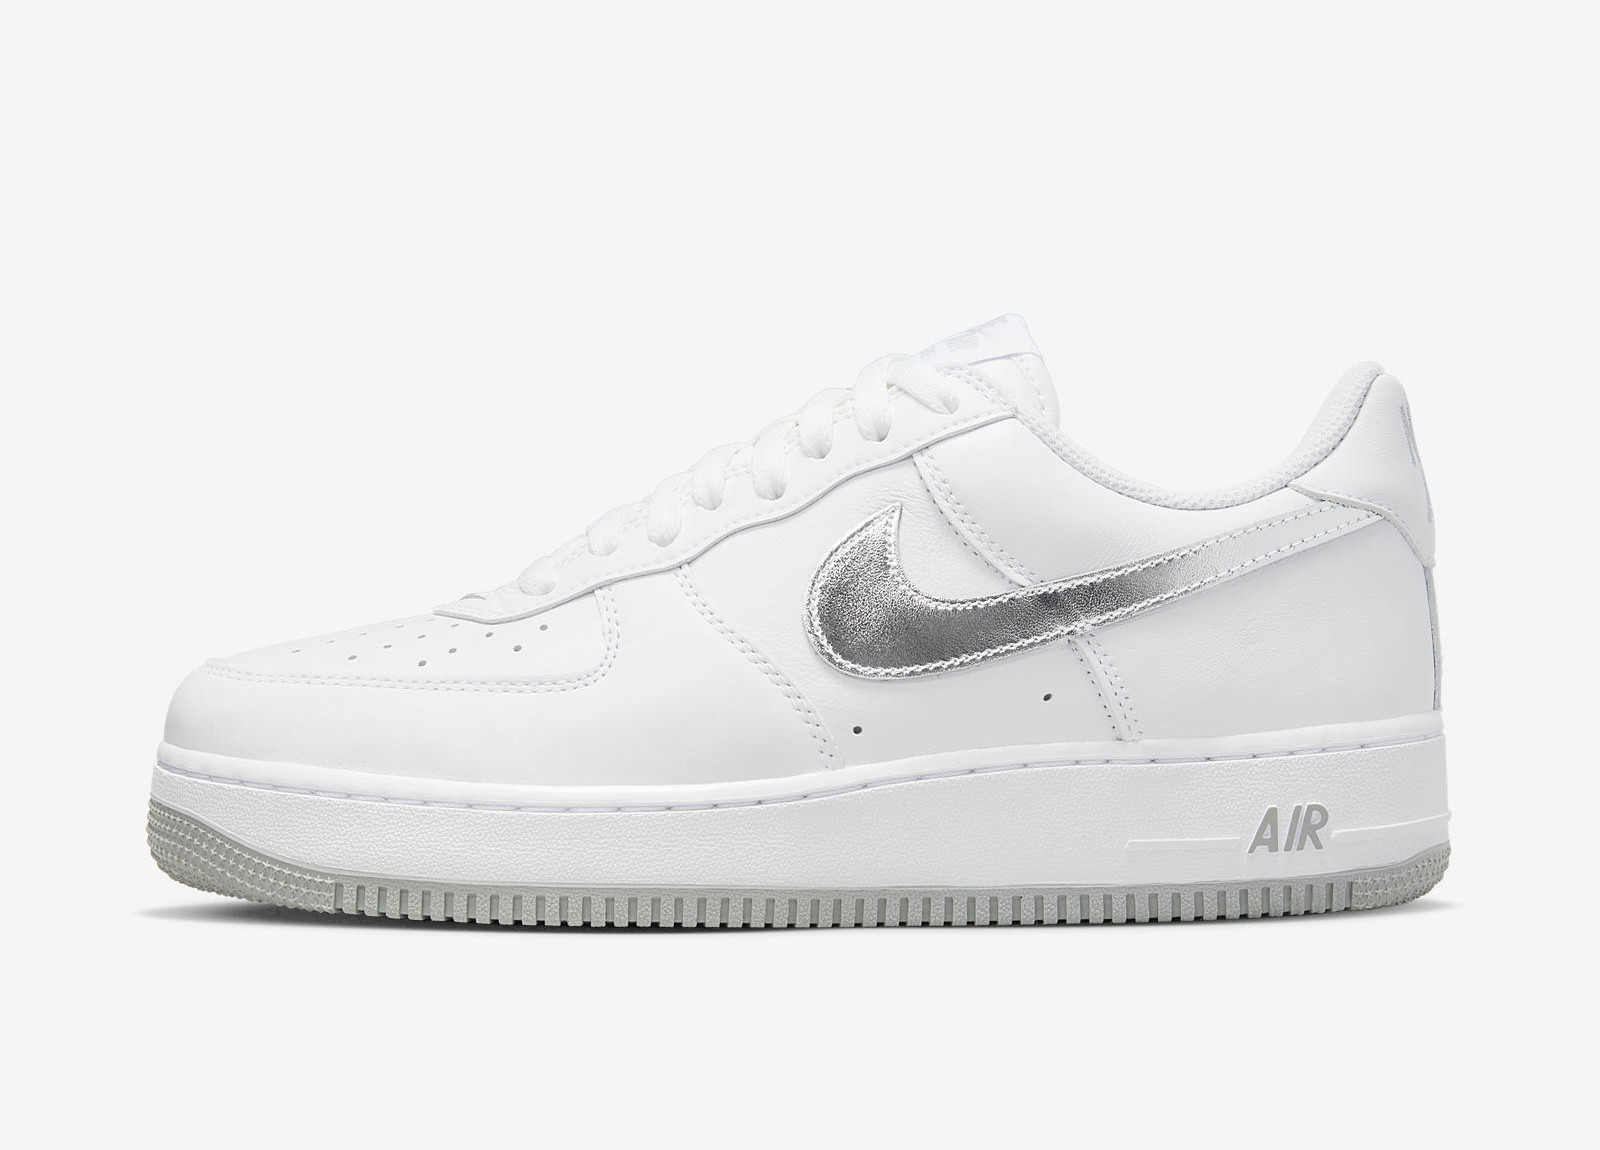 Nike Air Force 1 Low
« Color of the Month »